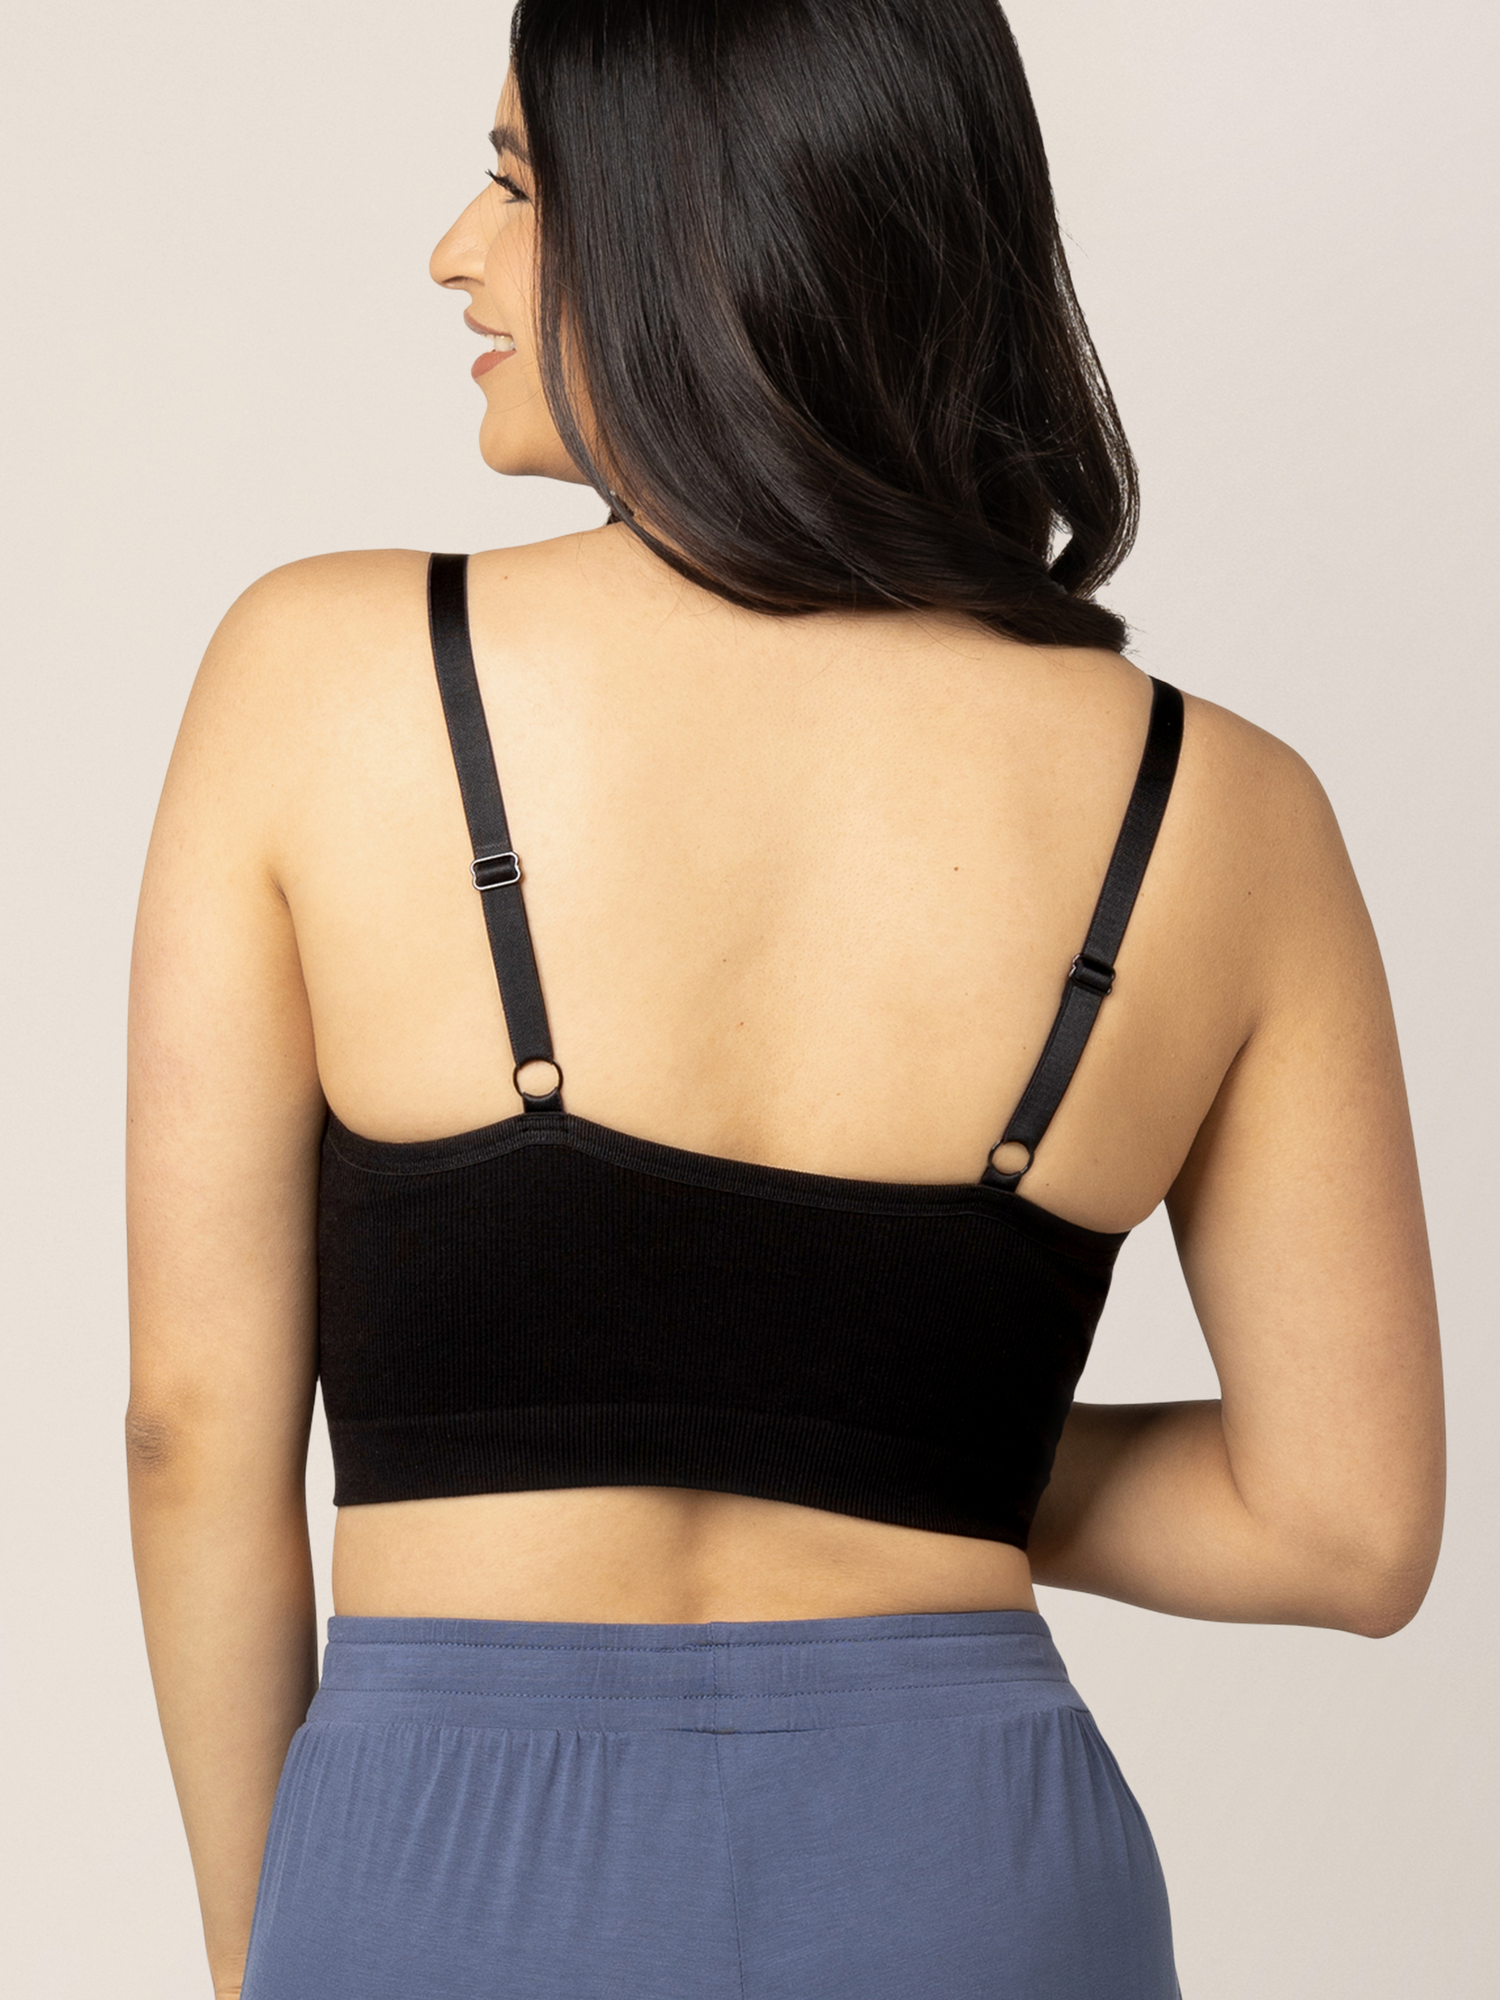 The back of a model wearing the Sublime® Bamboo Hands-Free Pumping Lounge & Sleep Bra in Black